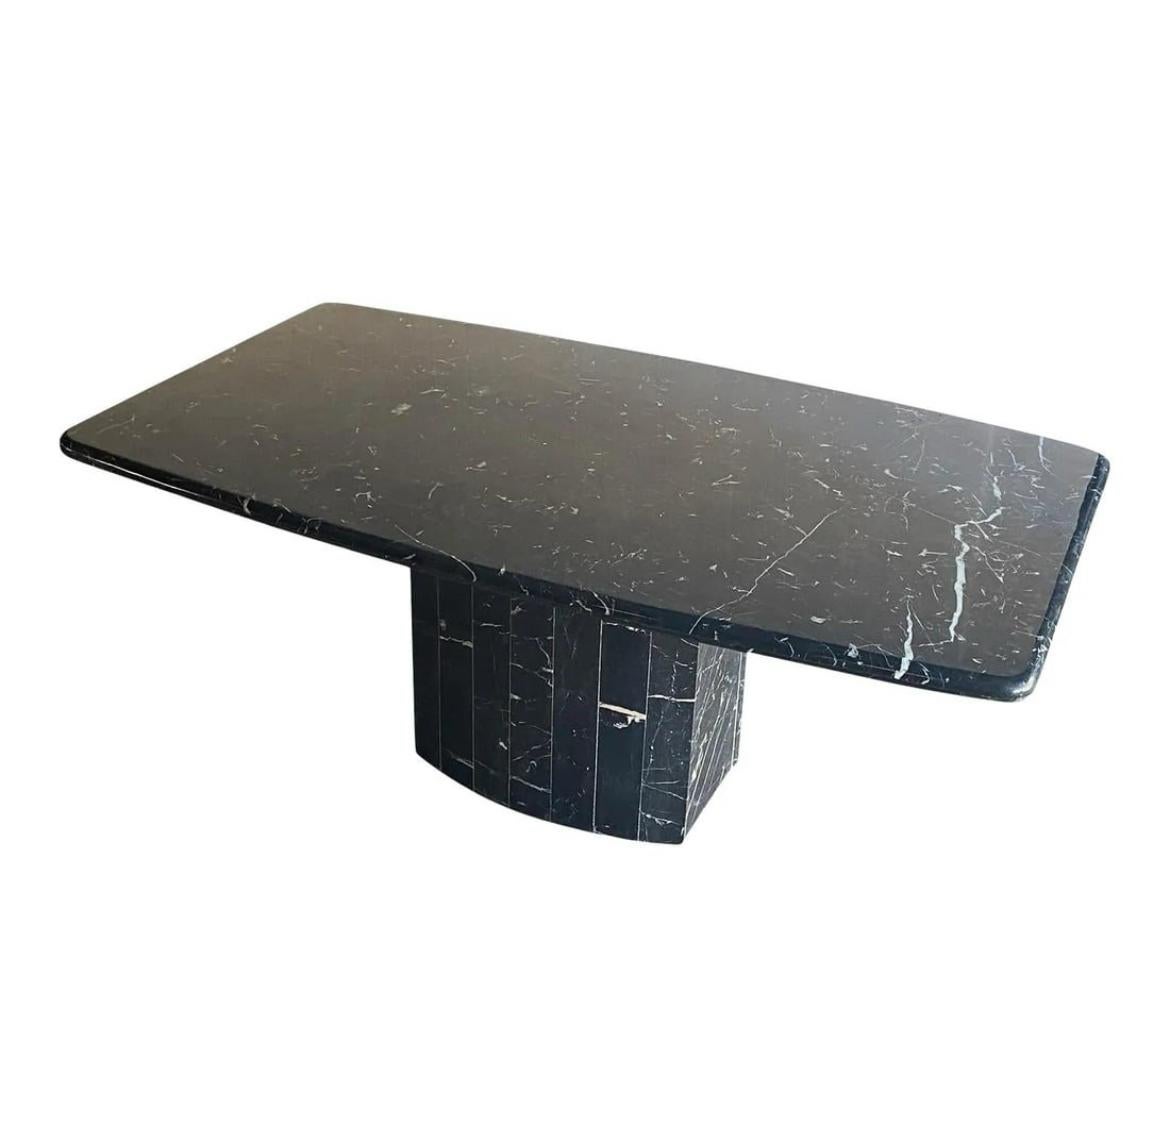 Stunning Mid-Century Modern Marquina black with white veins marble dining table with oval segmented base. Beautiful curved geometric designed shape similar to Willy Rizzo designs. Table top is 72” x 40” x 2” rounded edge profile. Table height 29”